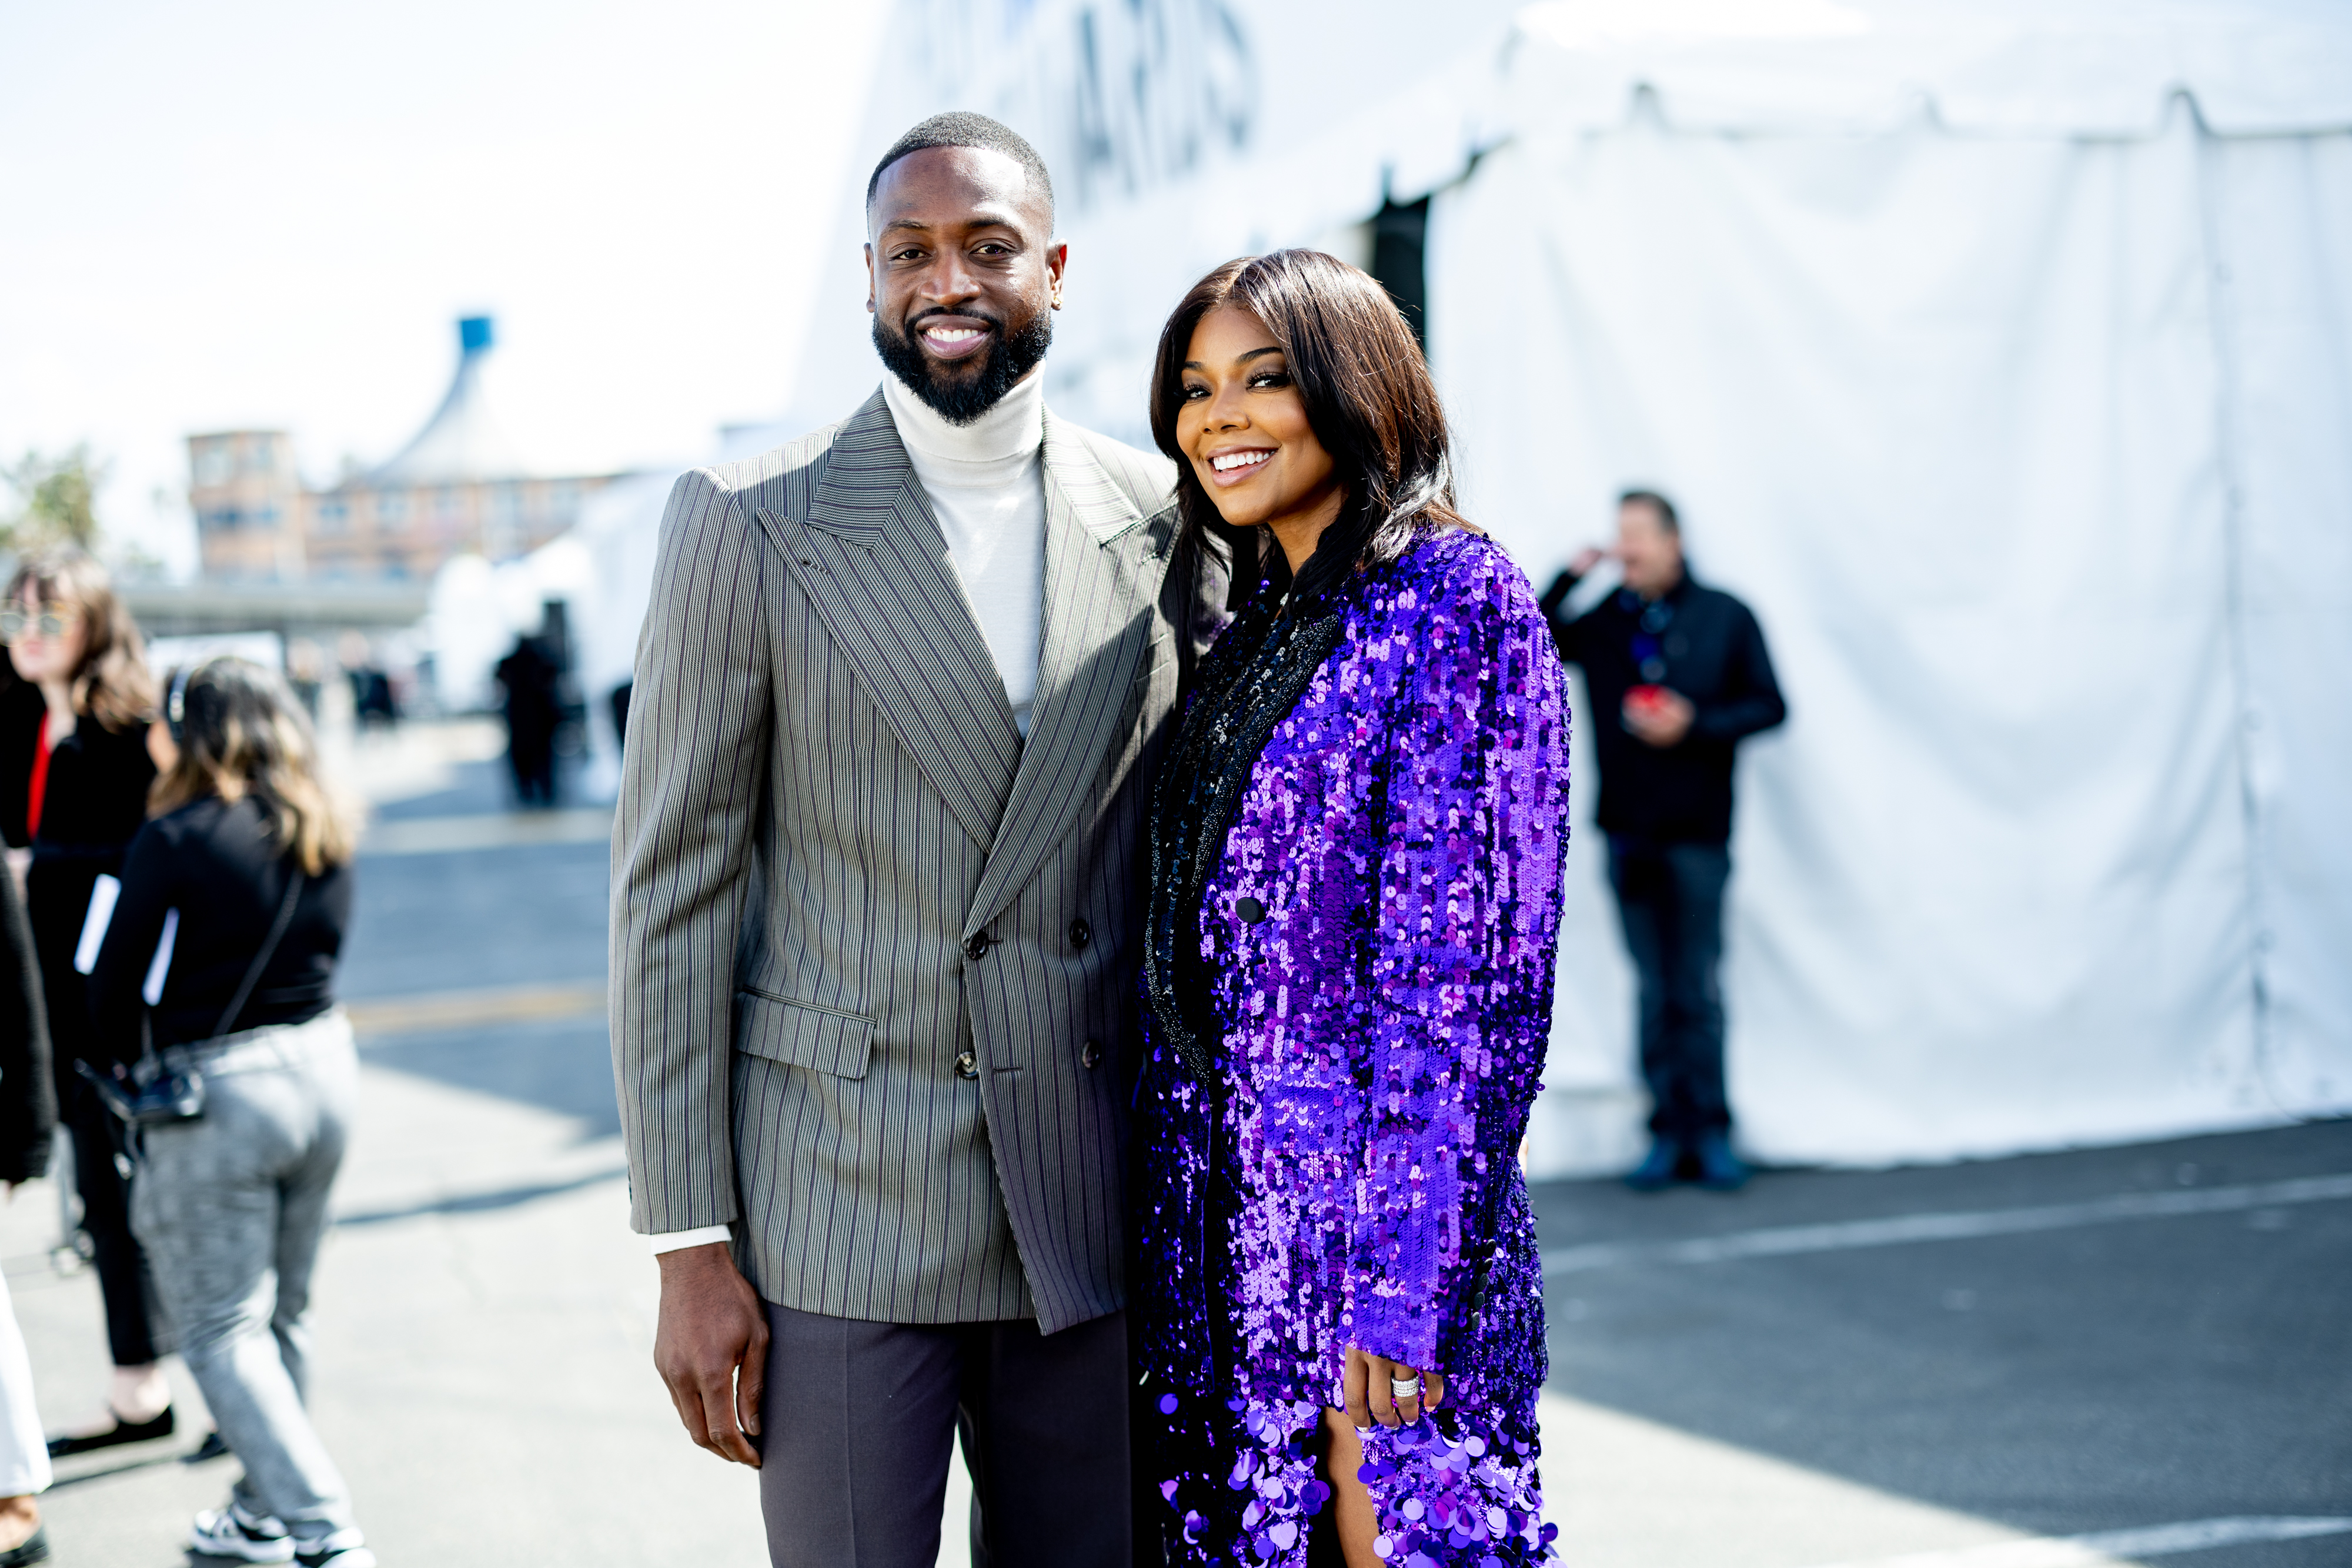 Gabrielle Union Reacts To Twitter Speculation About Her & Dwyane Wade’s Sex Life